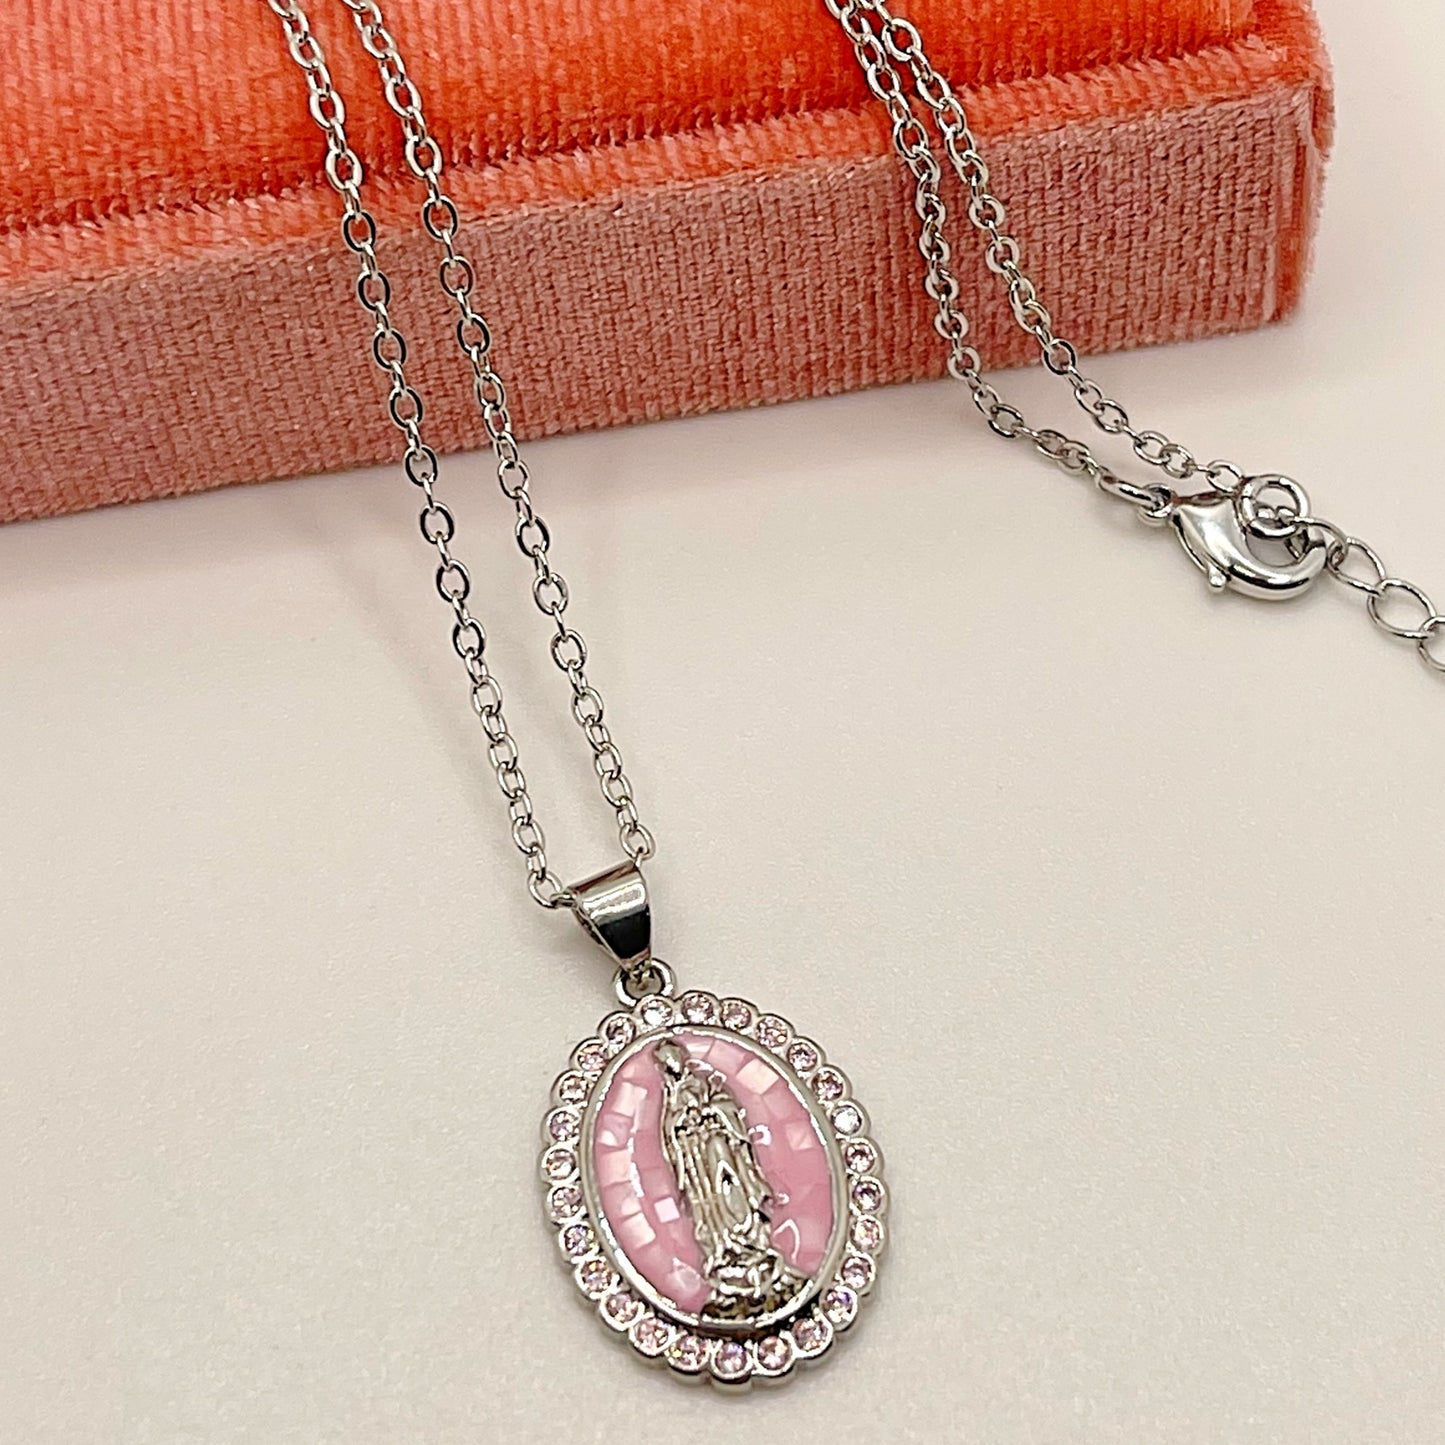 Silver Lady of Guadalupe Necklace